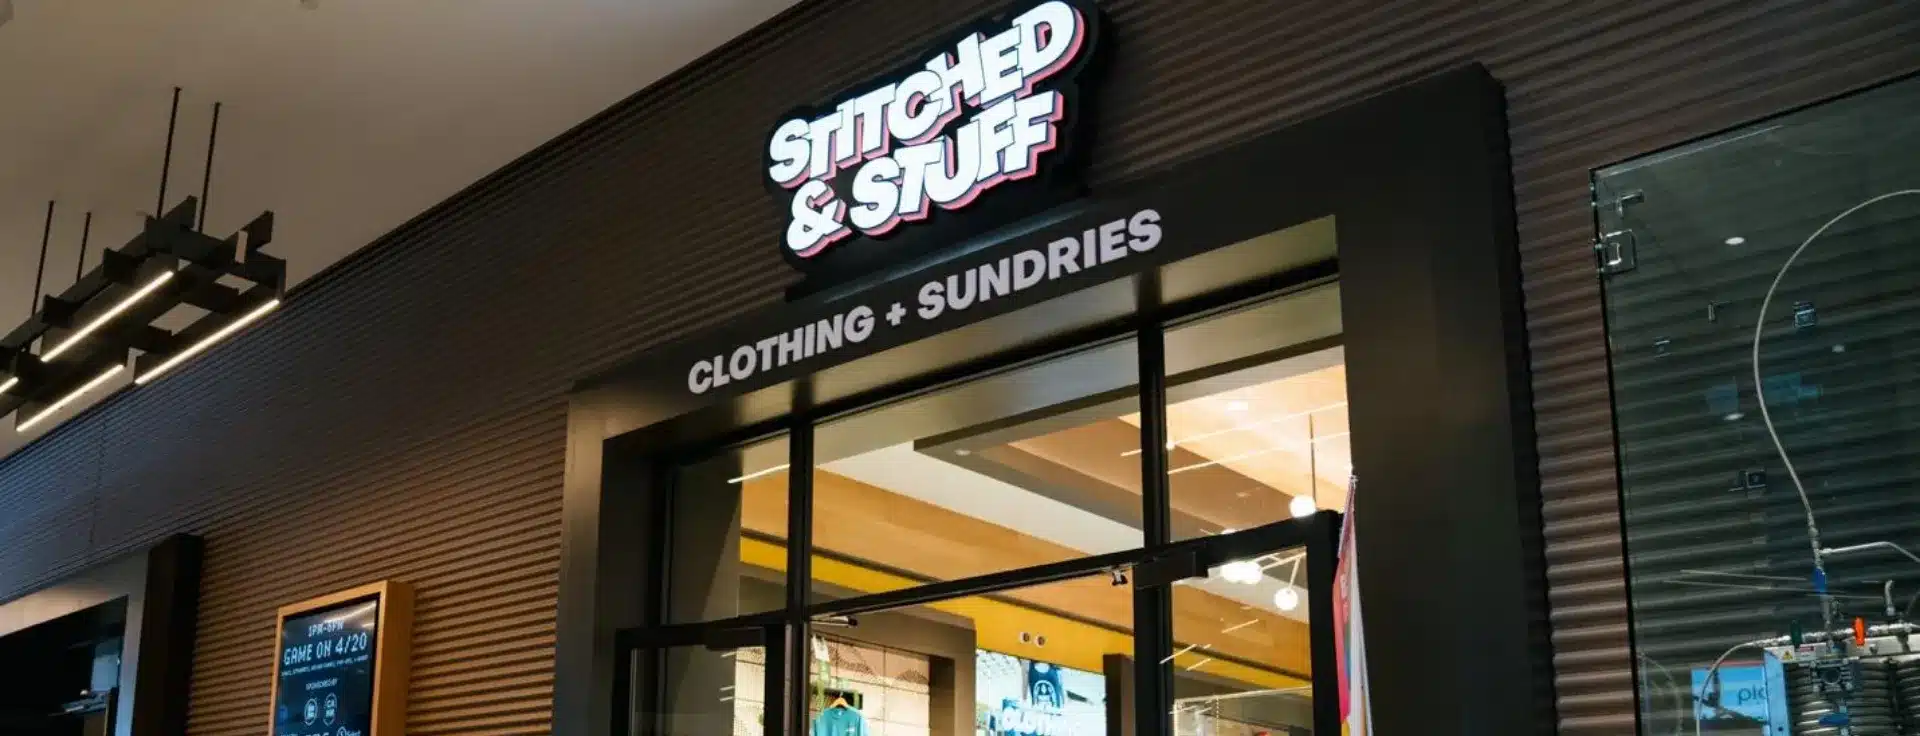 Front store of Stitched & Stuff